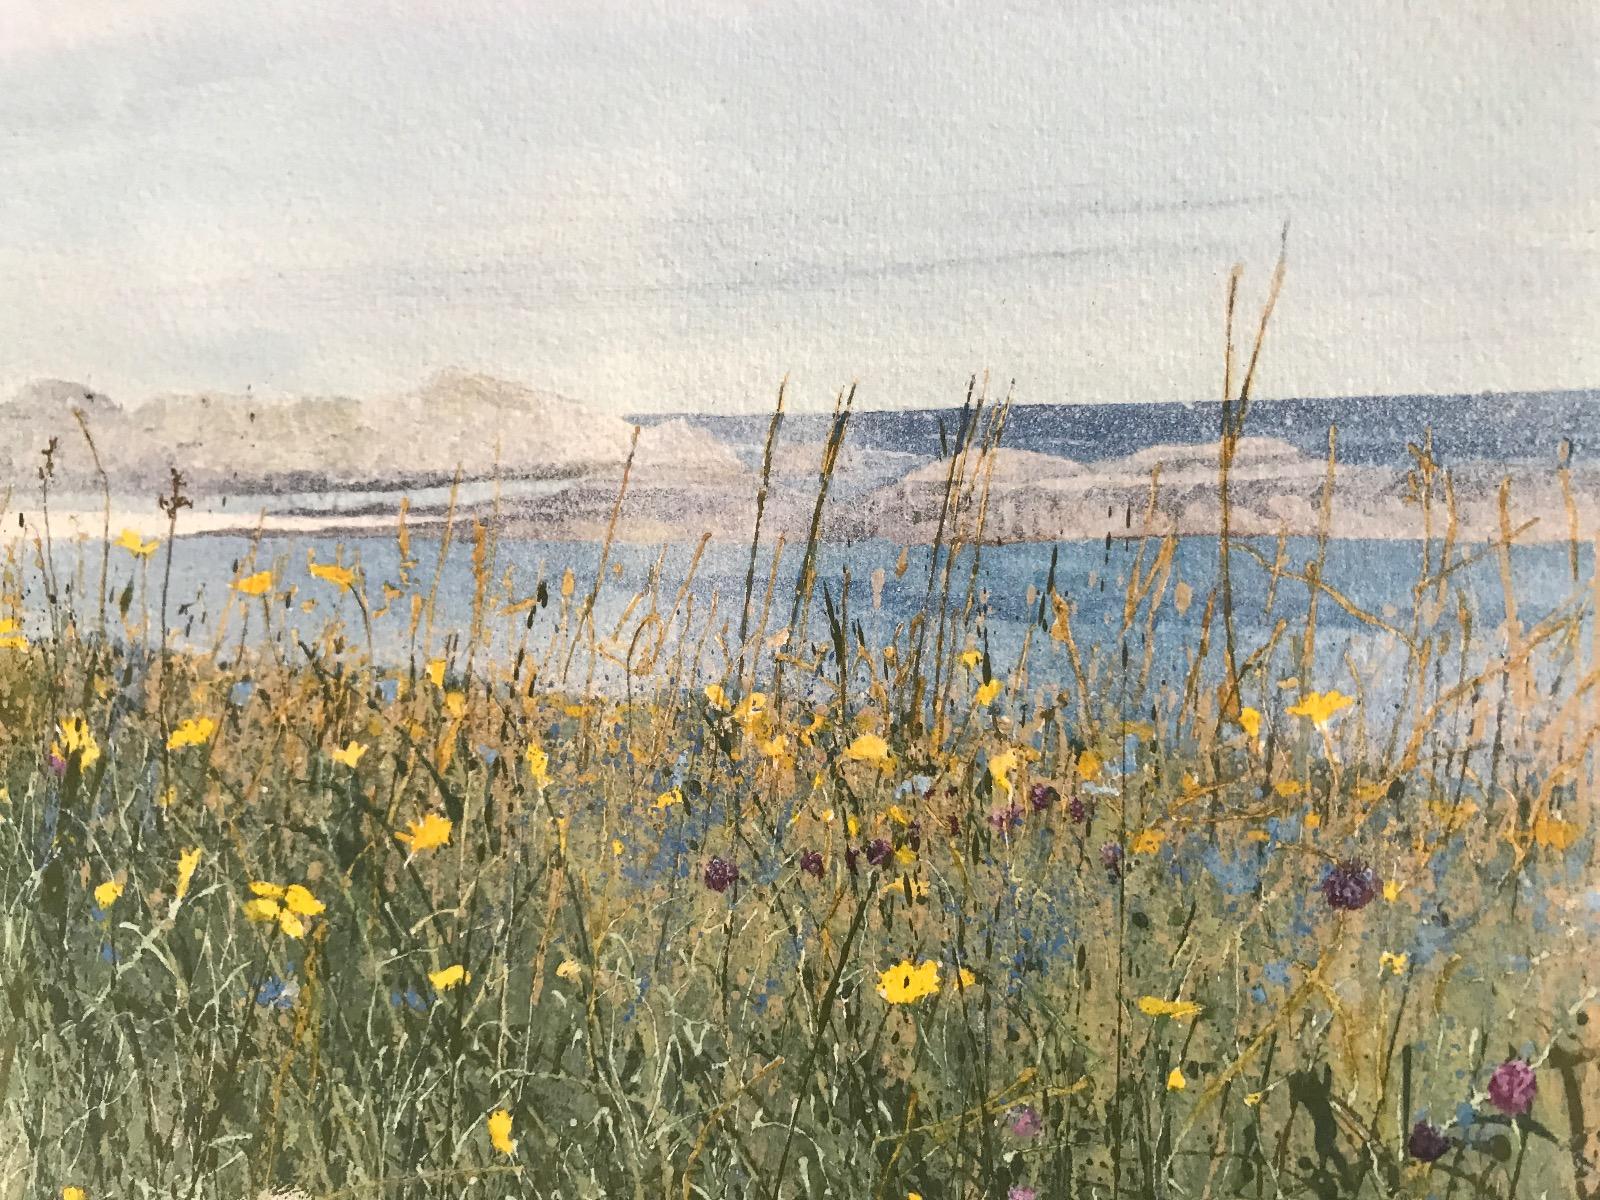 Judith Yarrow. Sea-meadow. This is a limited edition Giclee print of 100, of exceptional quality, using light fast inks on Albrecht Durer fine art paper, with accurate colour matching to the original. It is numbered and signed front and back. This